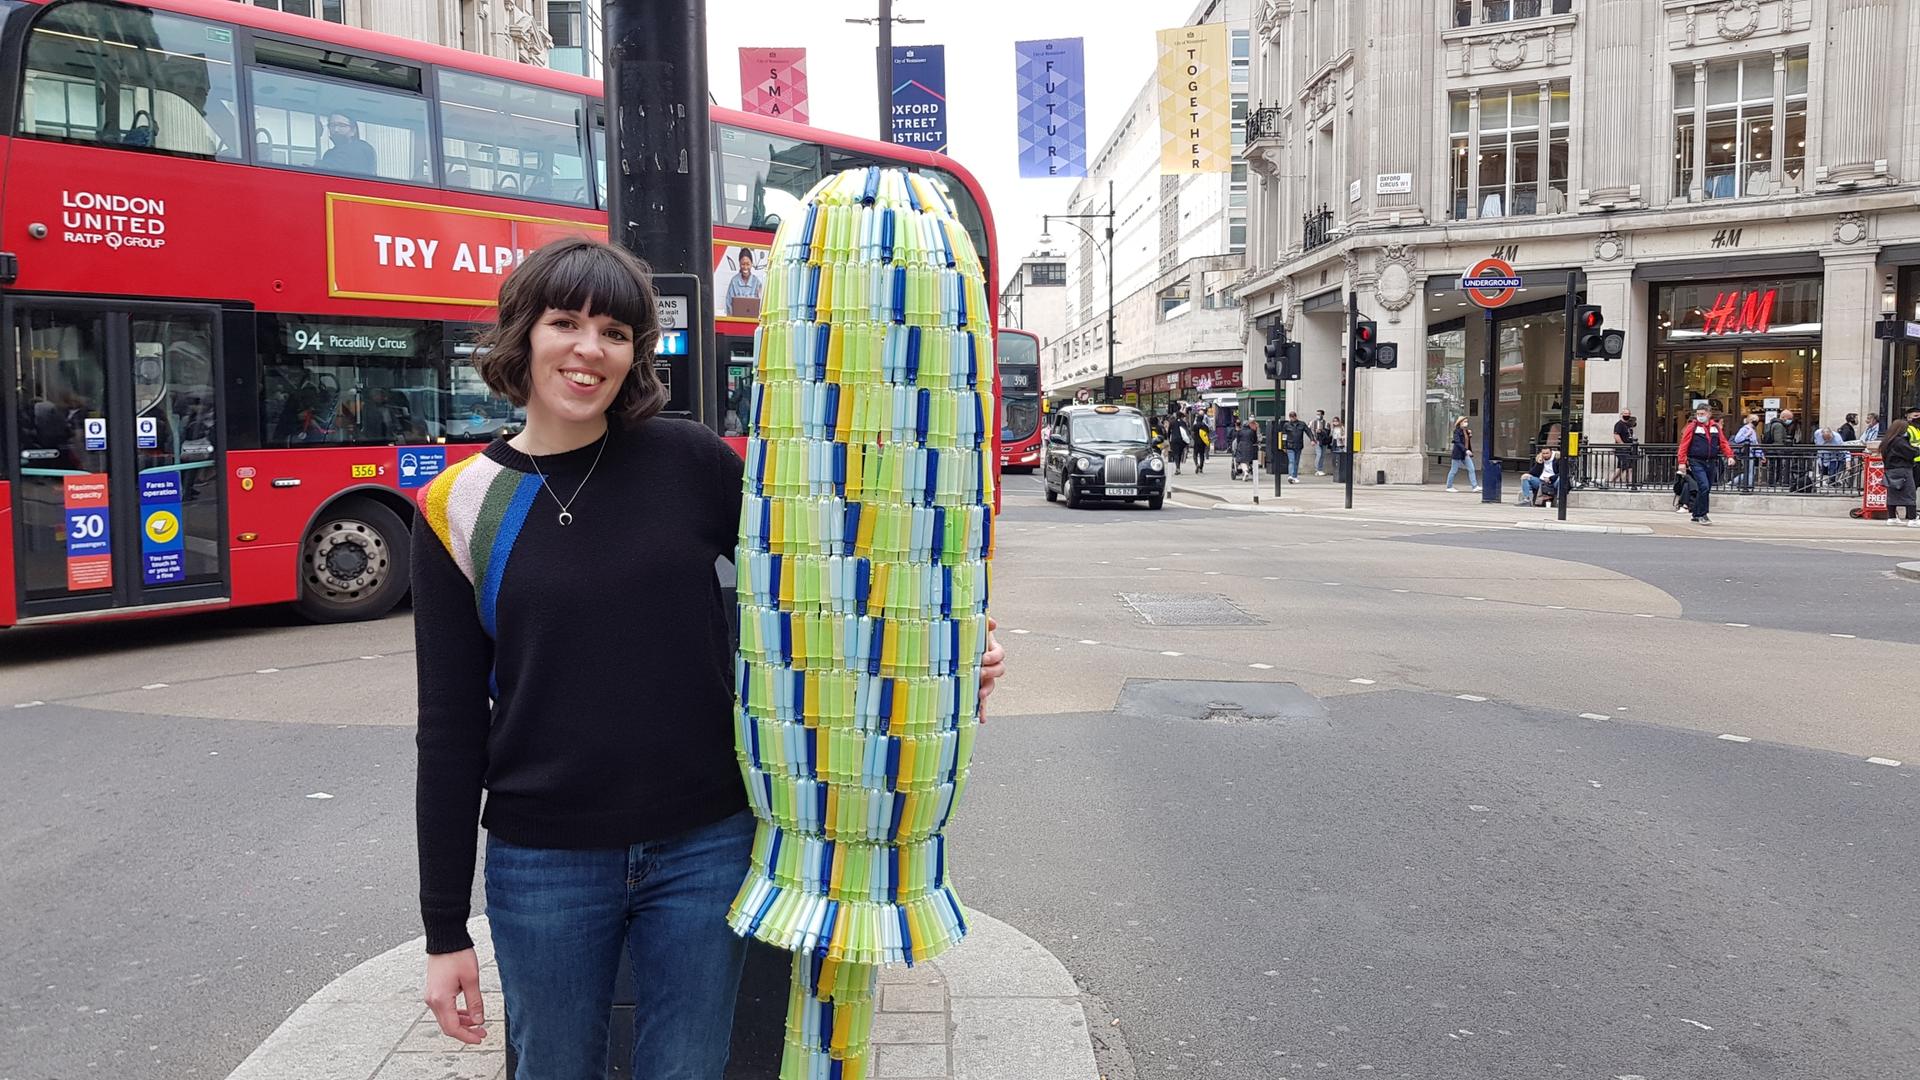 UK environmental activist Ella Daish is shown with the giant tampon she made out of over a thousand used tampons.